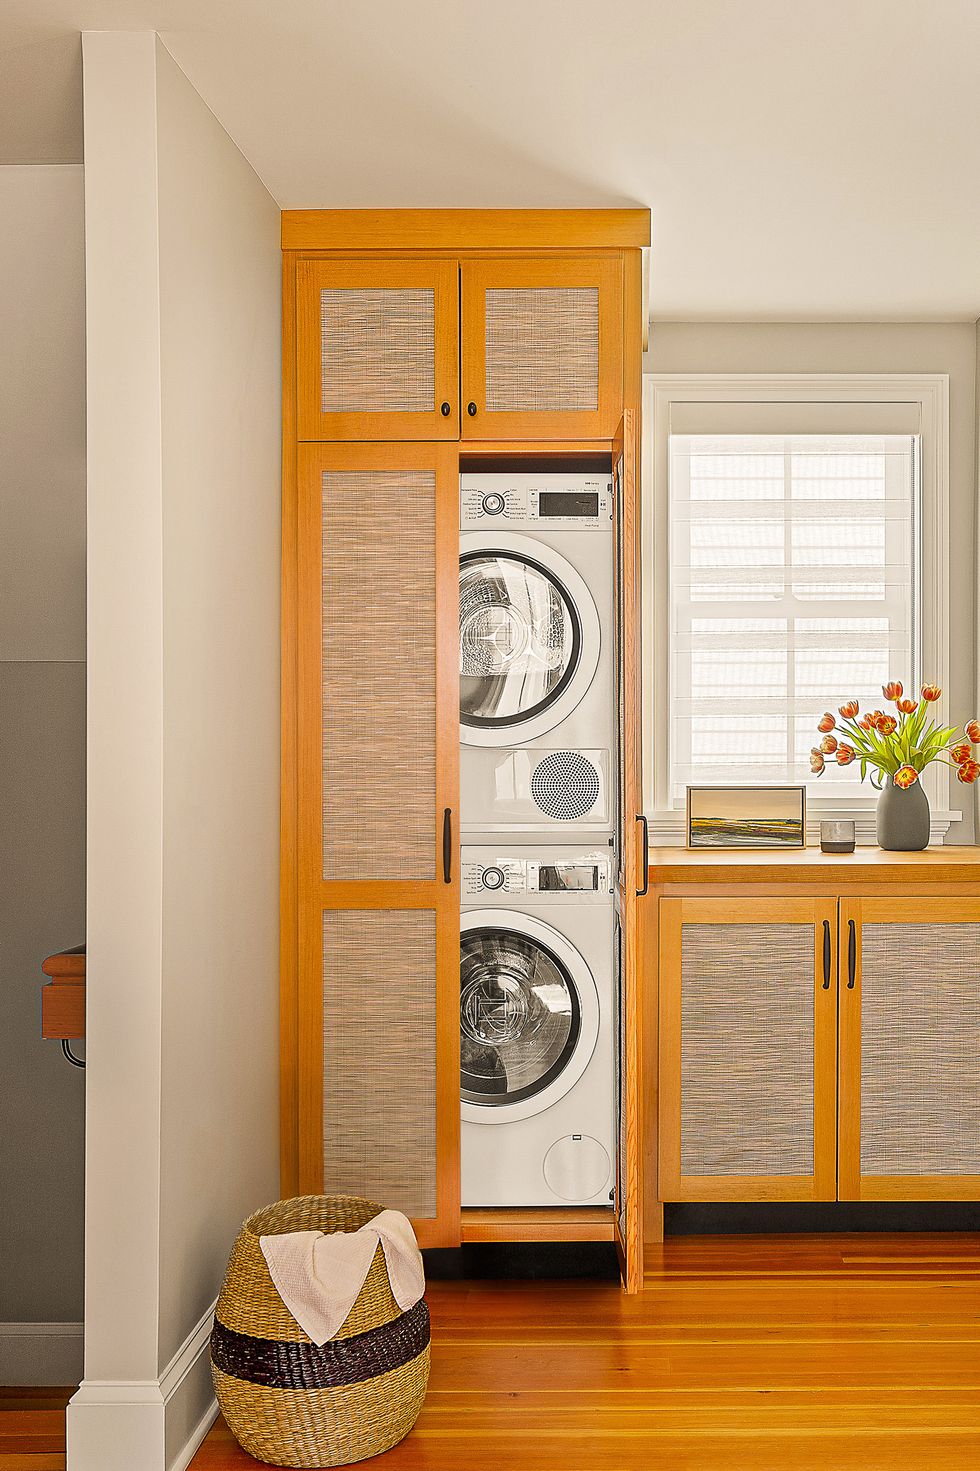 https://hips.hearstapps.com/hmg-prod/images/sarah-and-sons-interiors-laundry-room-03-photo-by-sarah-szwajkos-sarah-szwajkos-sarah-szwajkos-1-6515868e497ff.jpg?crop=0.838xw:0.972xh;0.162xw,0.0276xh&resize=980:*